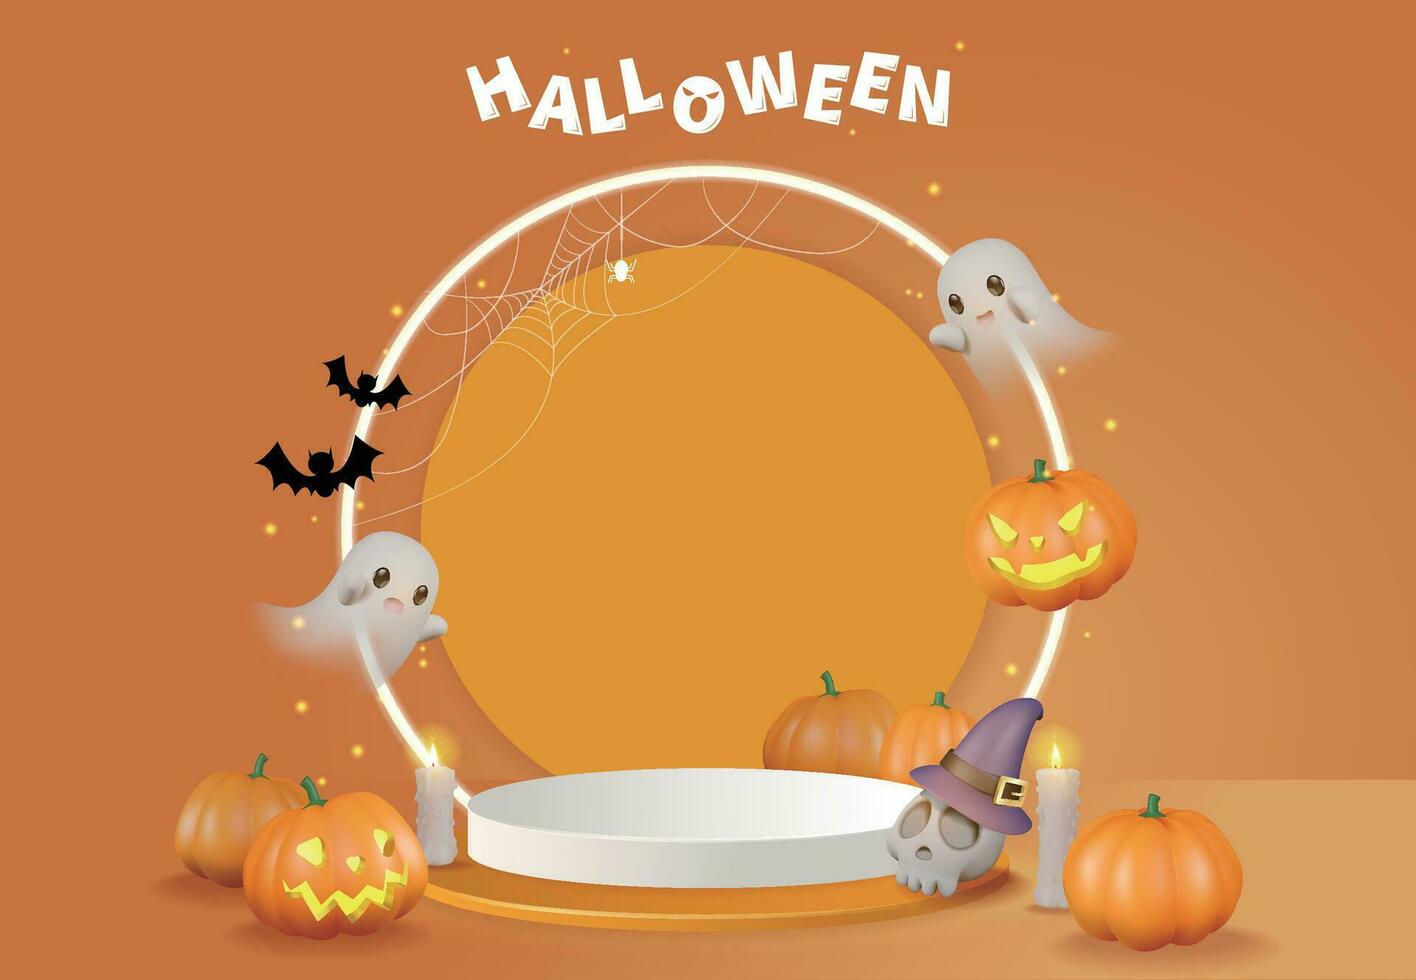 Halloween sale stand with ghosts, skulls and more vector